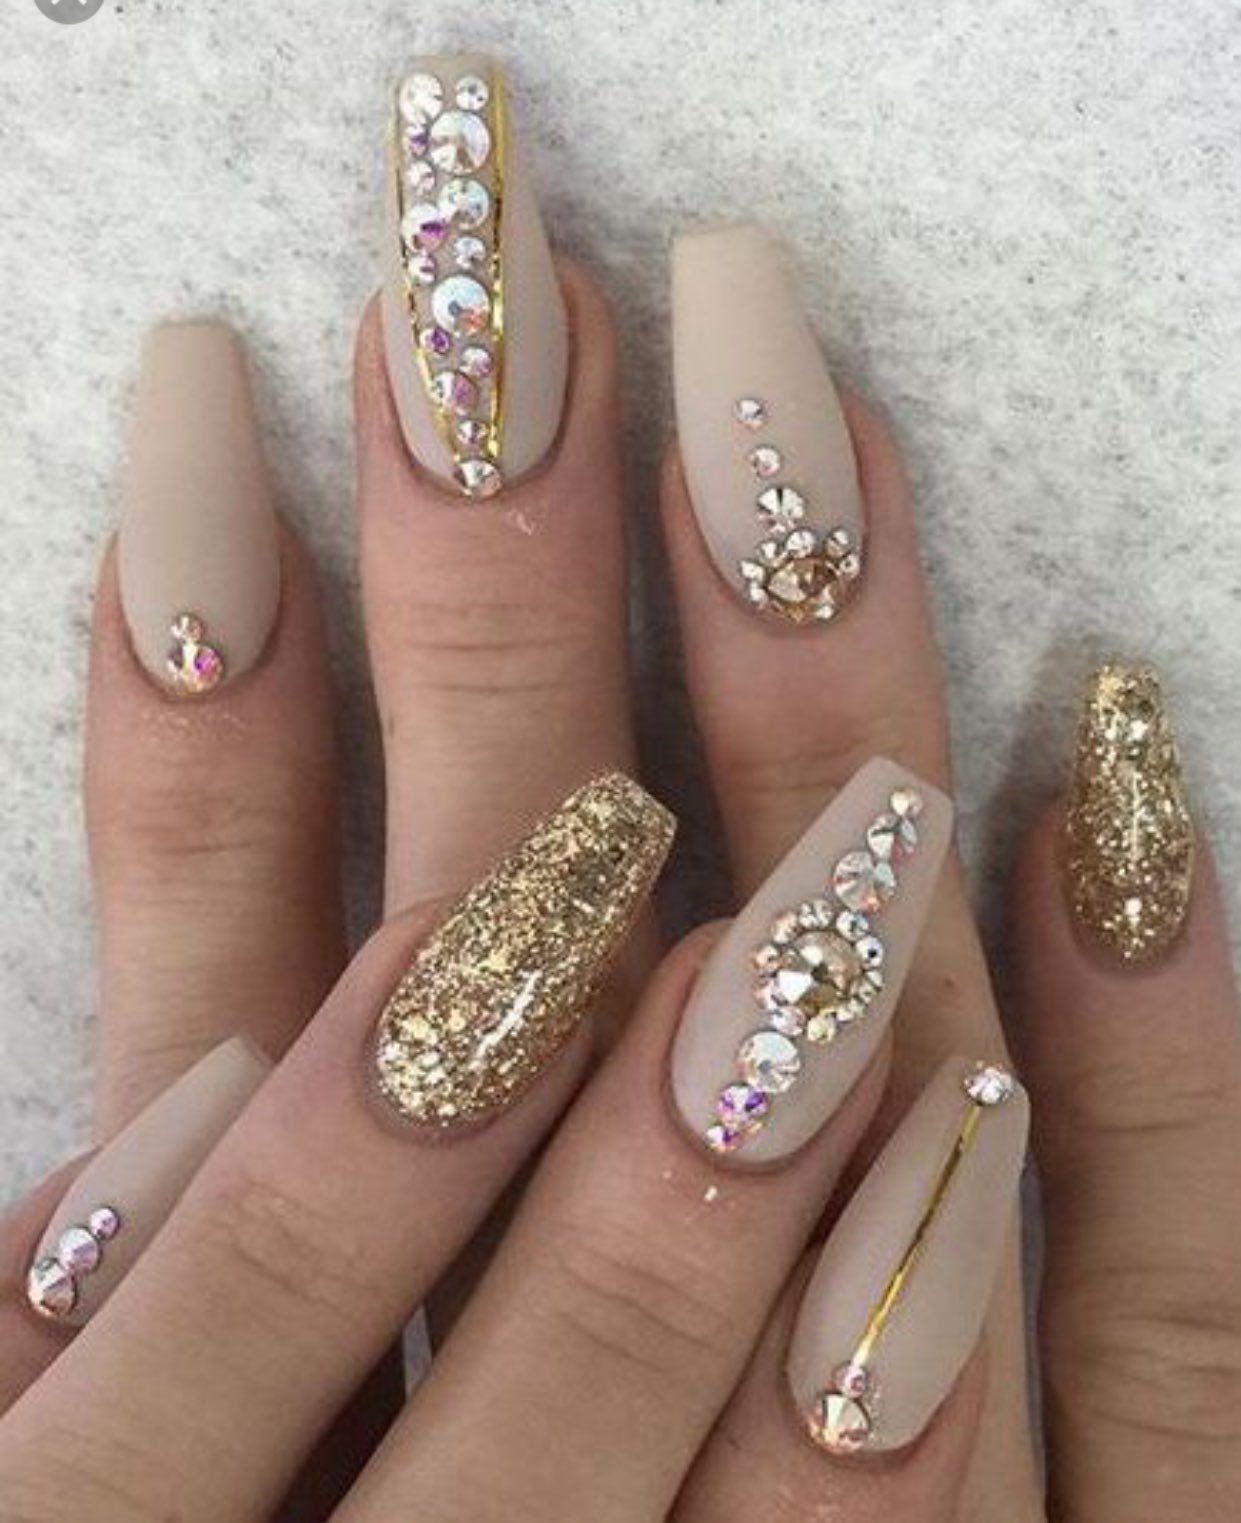 Soft Girl Nail Art Is The Latest Manicure Trend. Here's How To Pull It Off